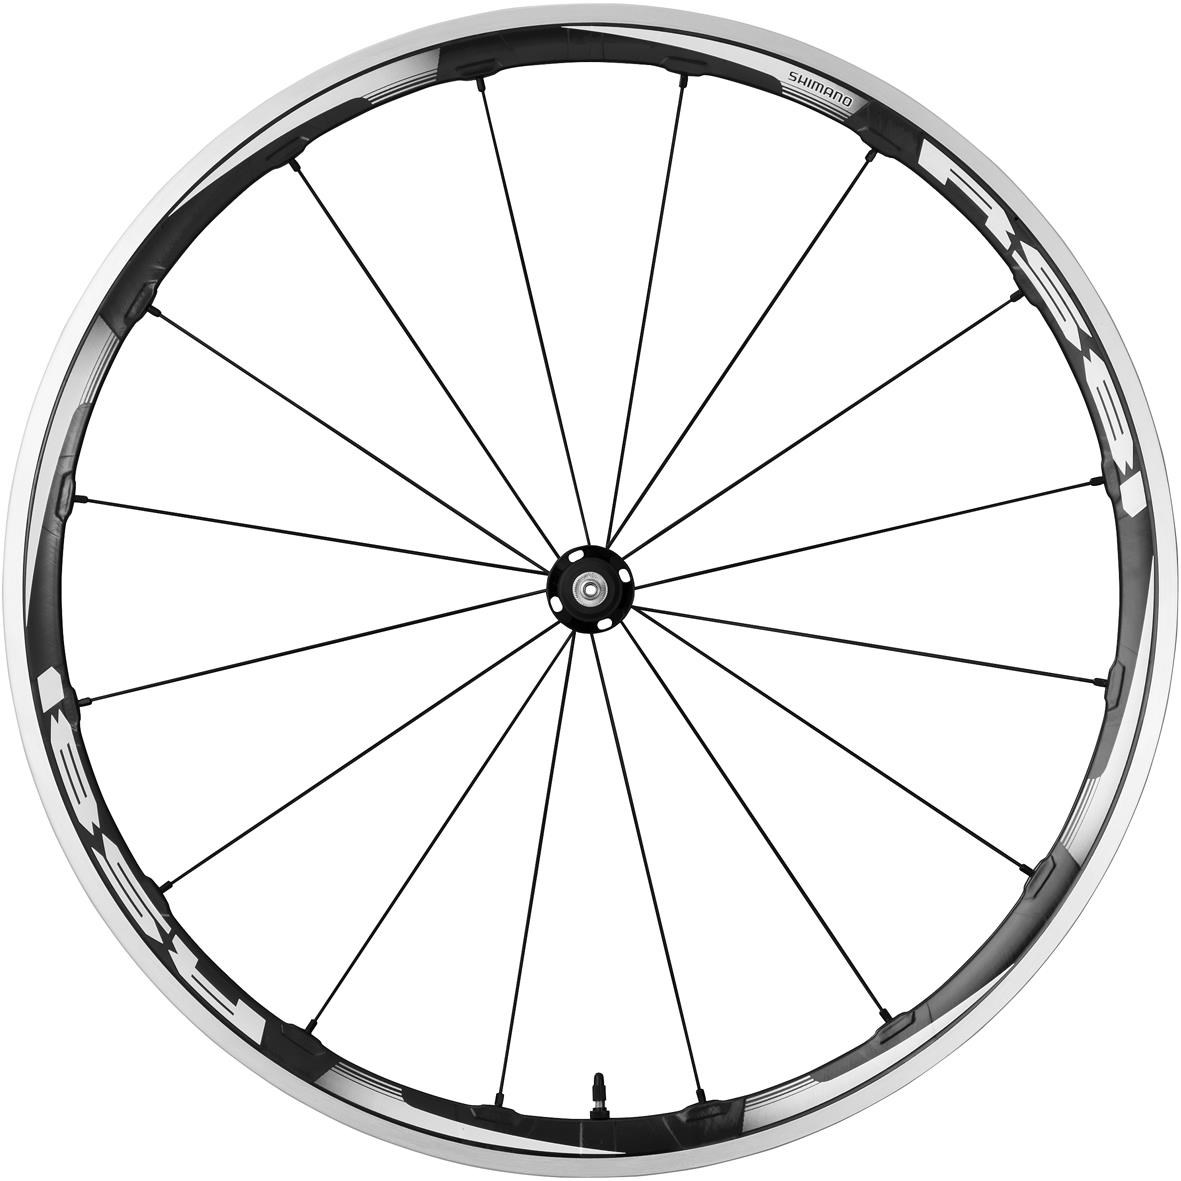 Shimano WH-RS81-C35-TL Wheel - Tubeless Ready Clincher 35 mm - Front